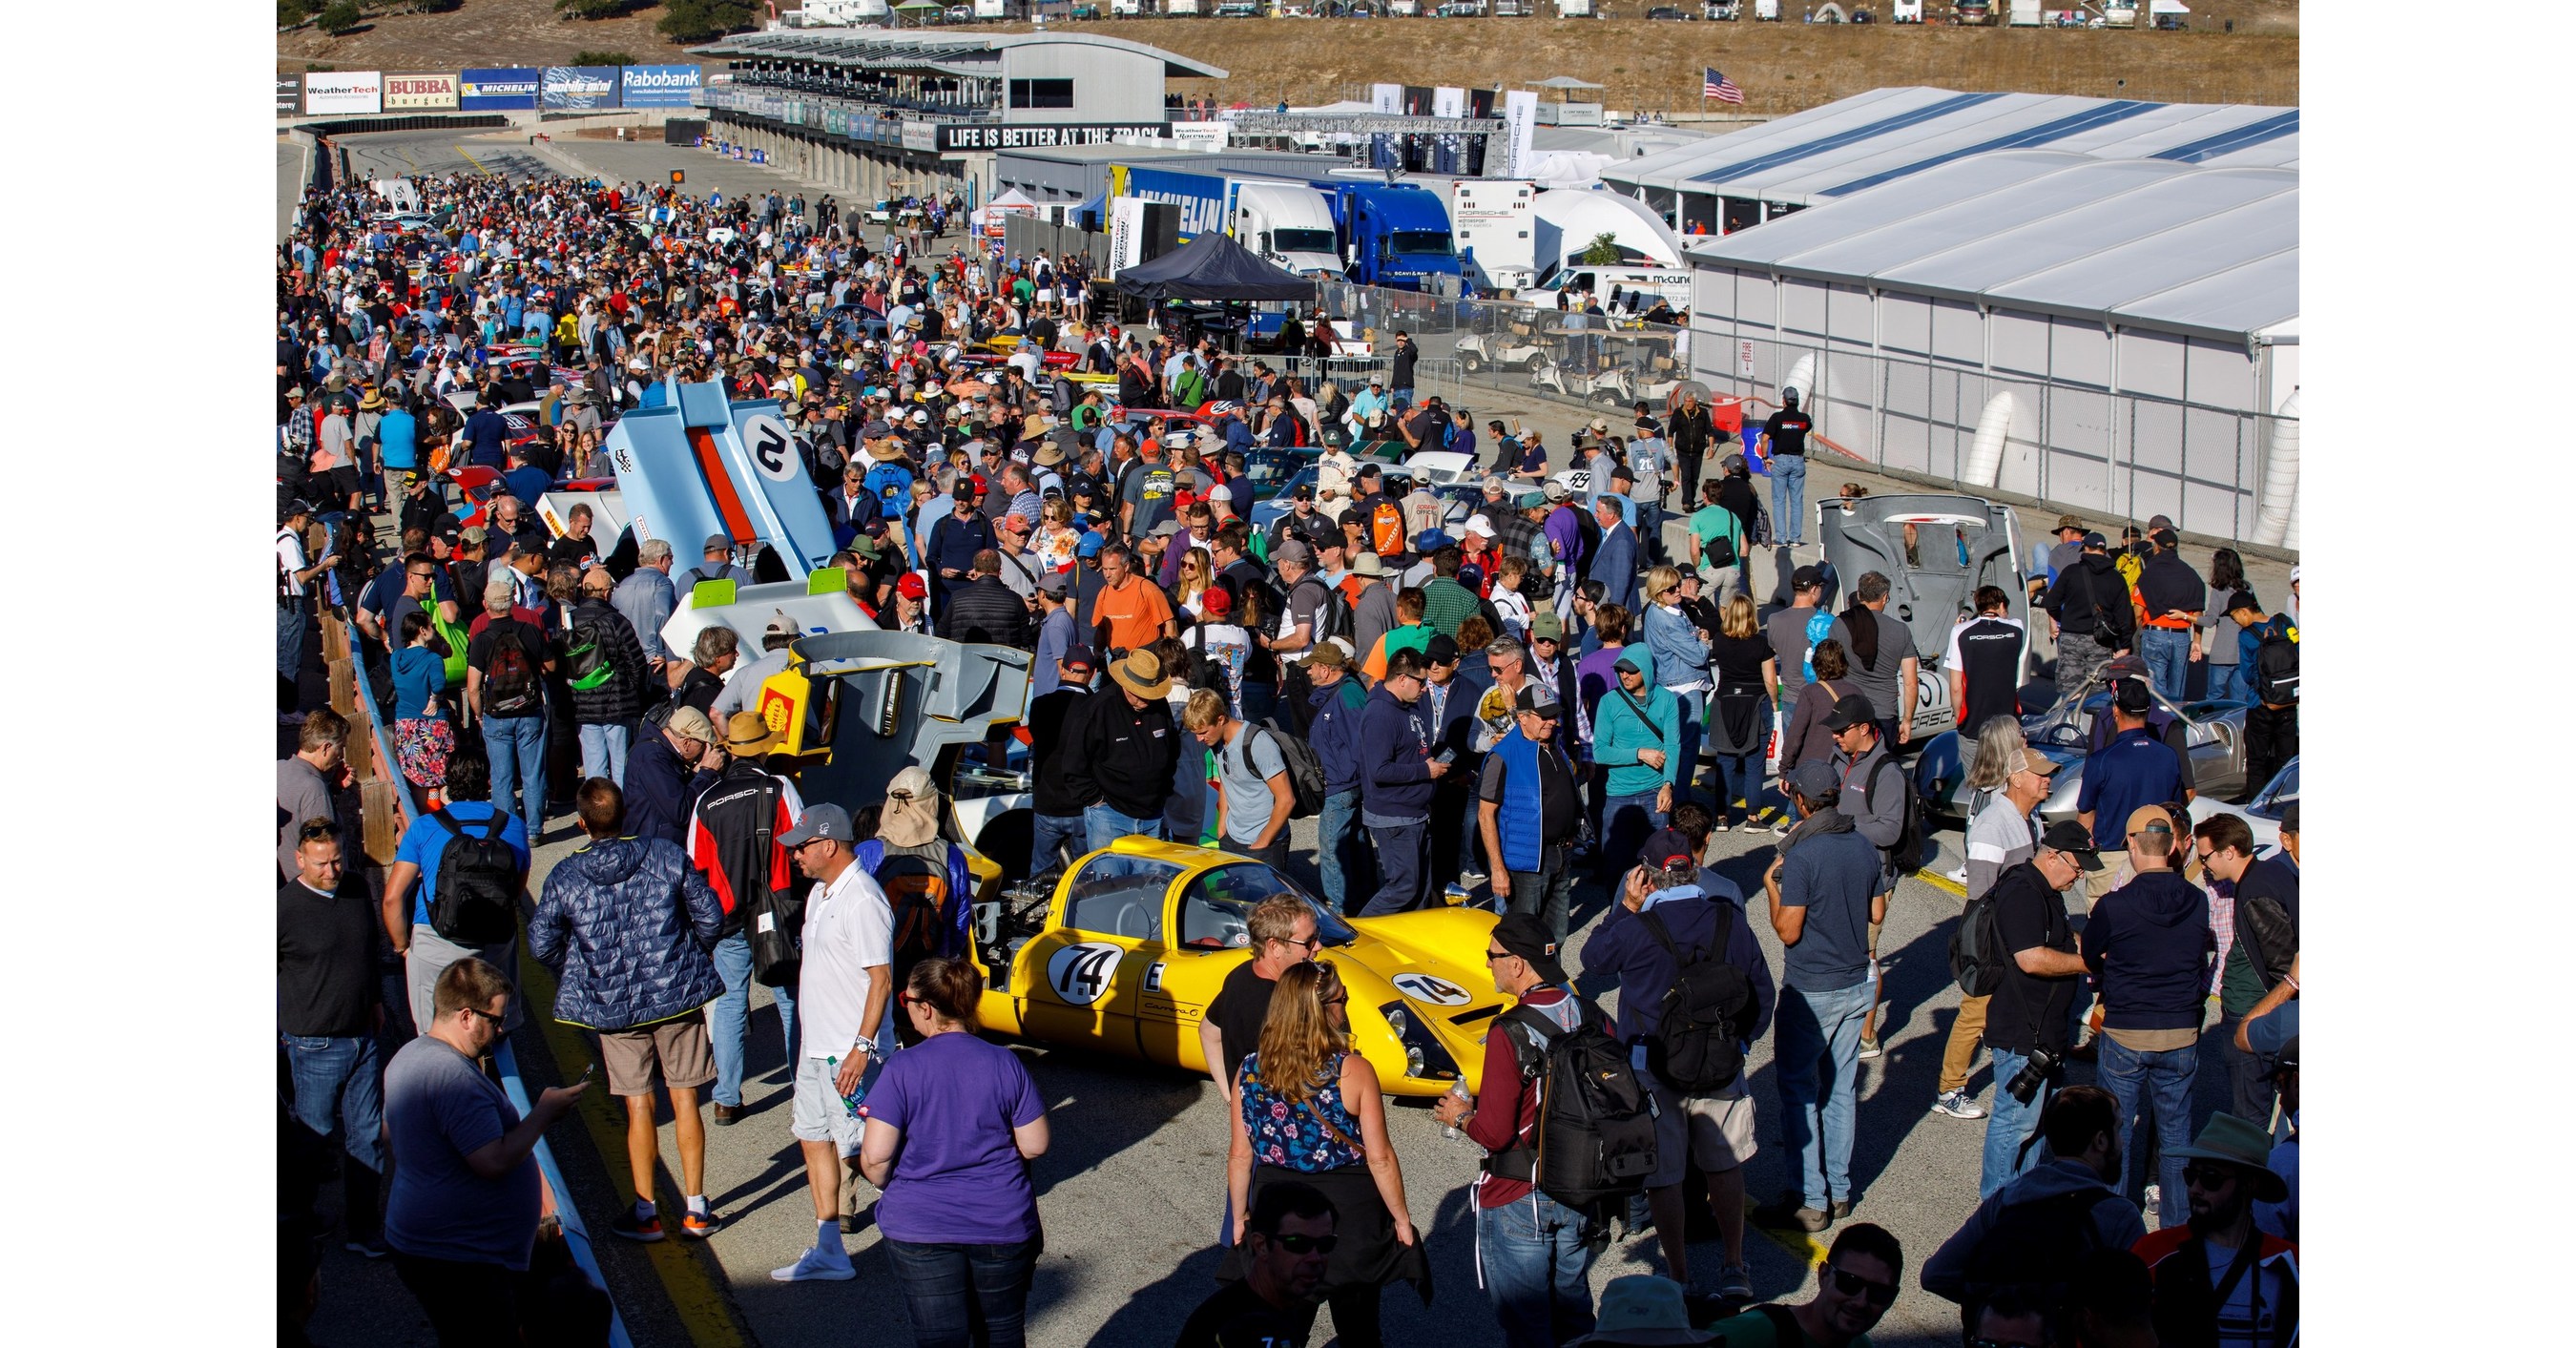 Porsche Rennsport Reunion VI Honors History With RecordBreaking 81,000